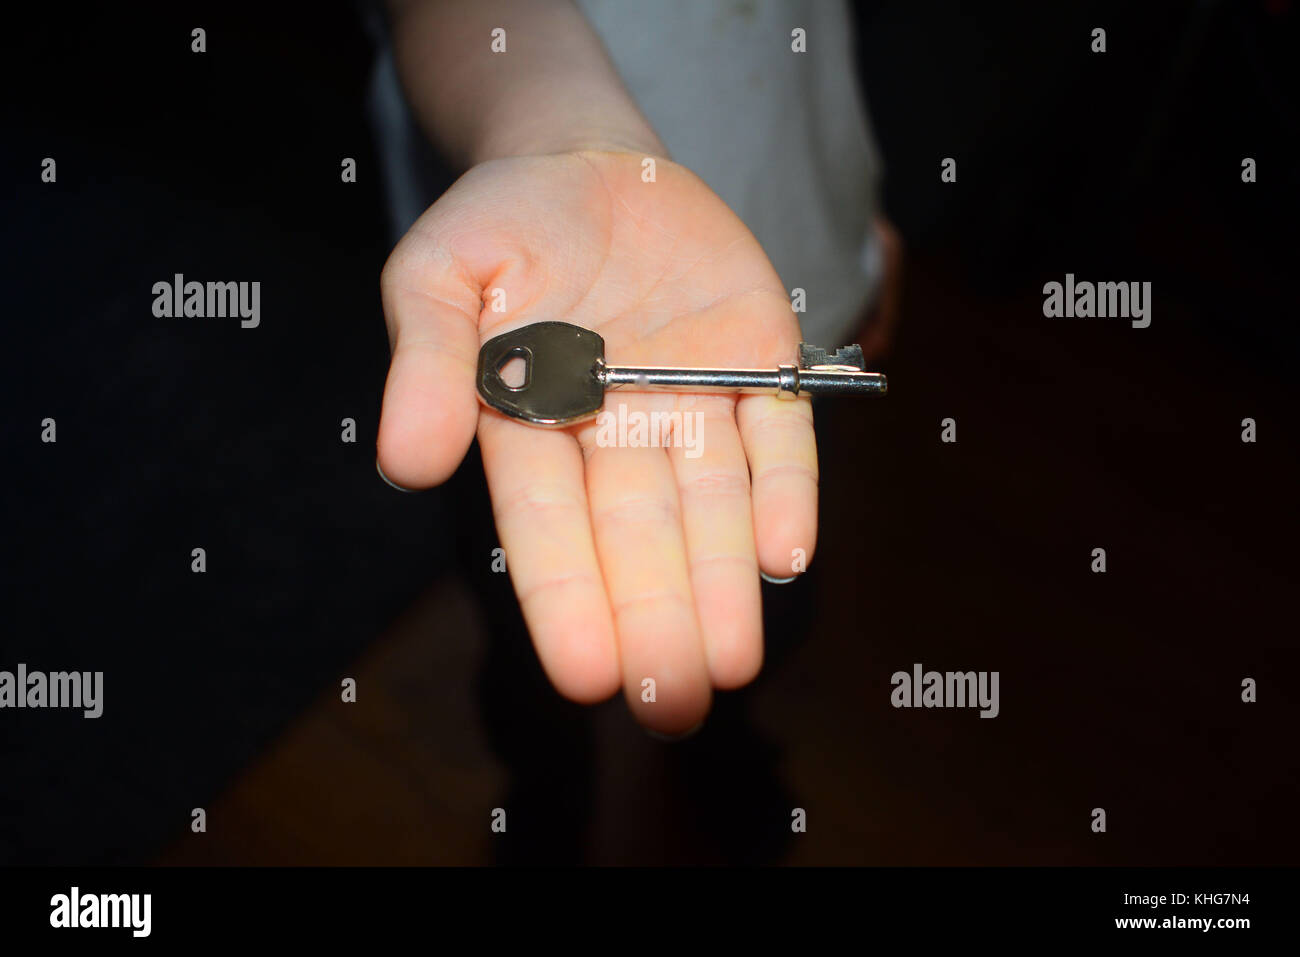 A key in the hand and one for the door Stock Photo